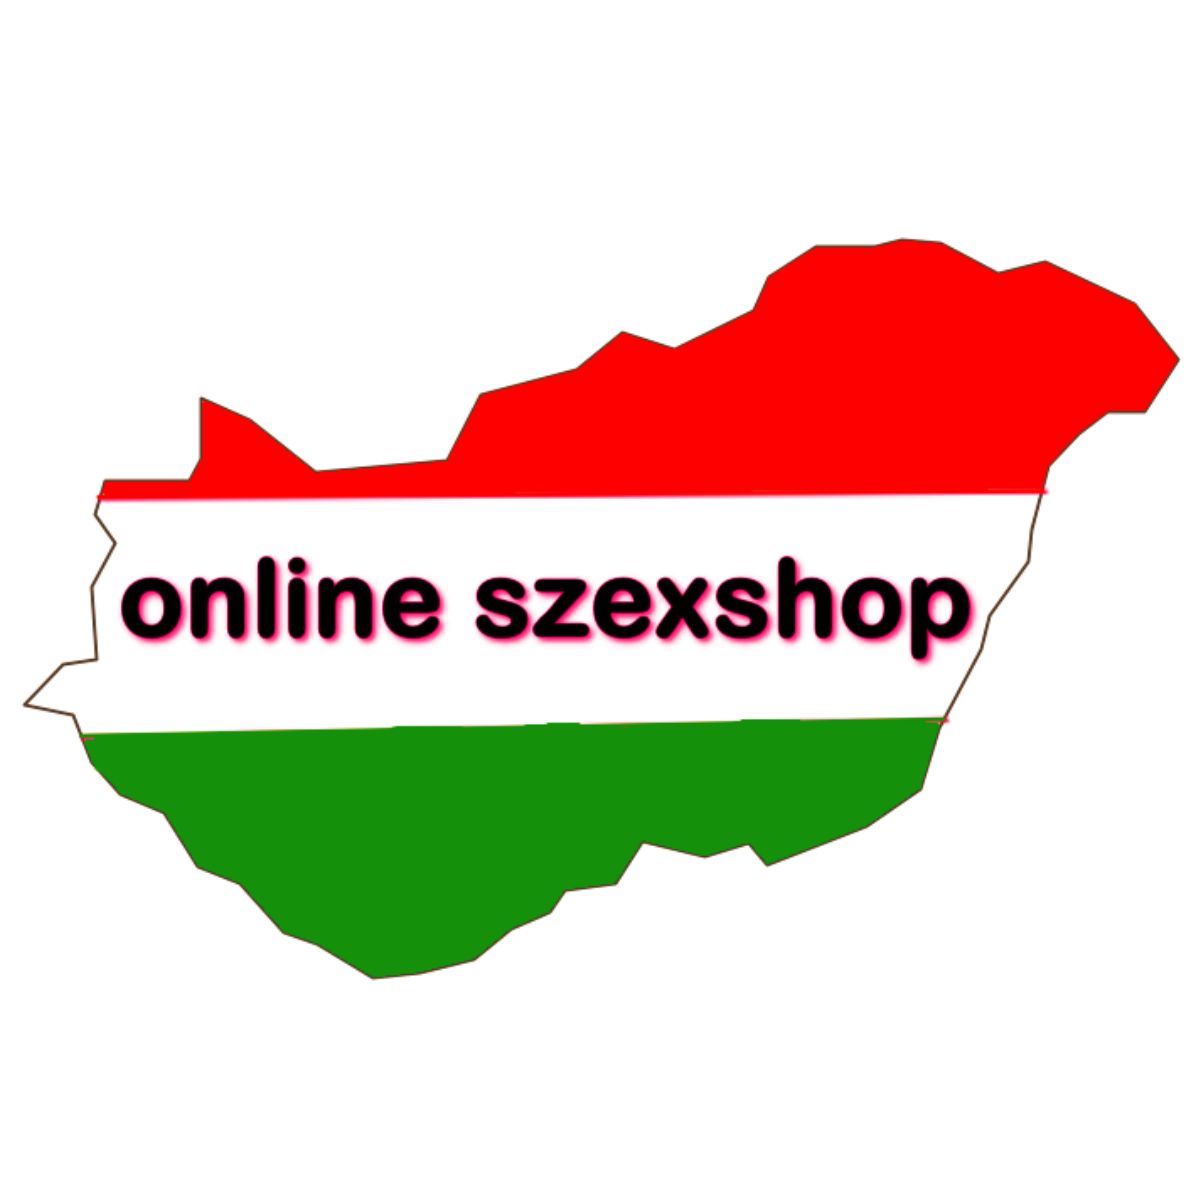 online szexshop - made in Hungary